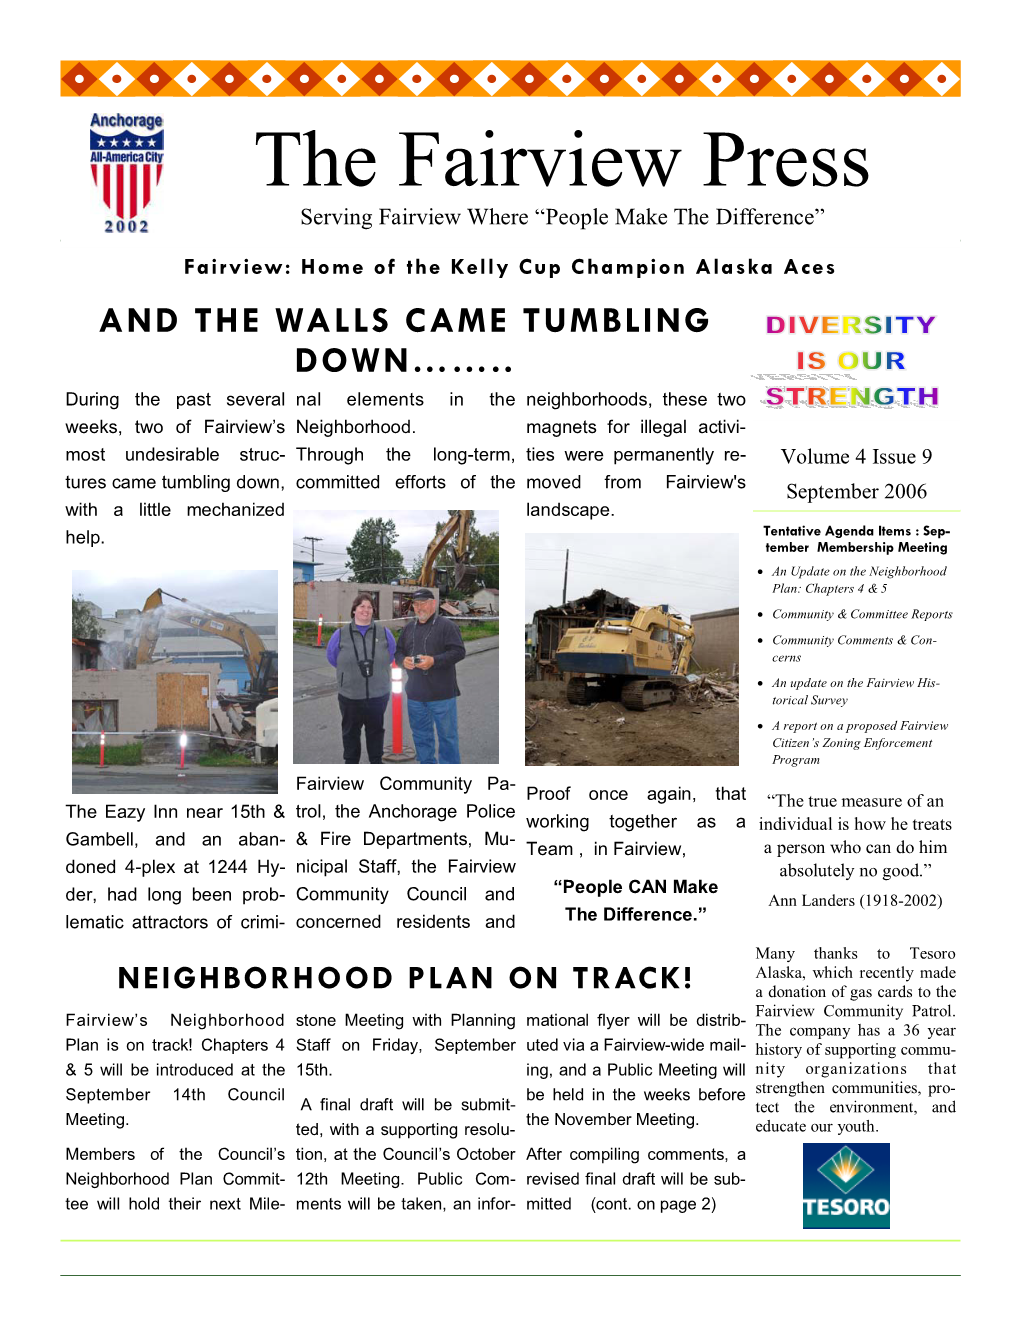 The Fairview Press Serving Fairview Where “People Make the Difference”